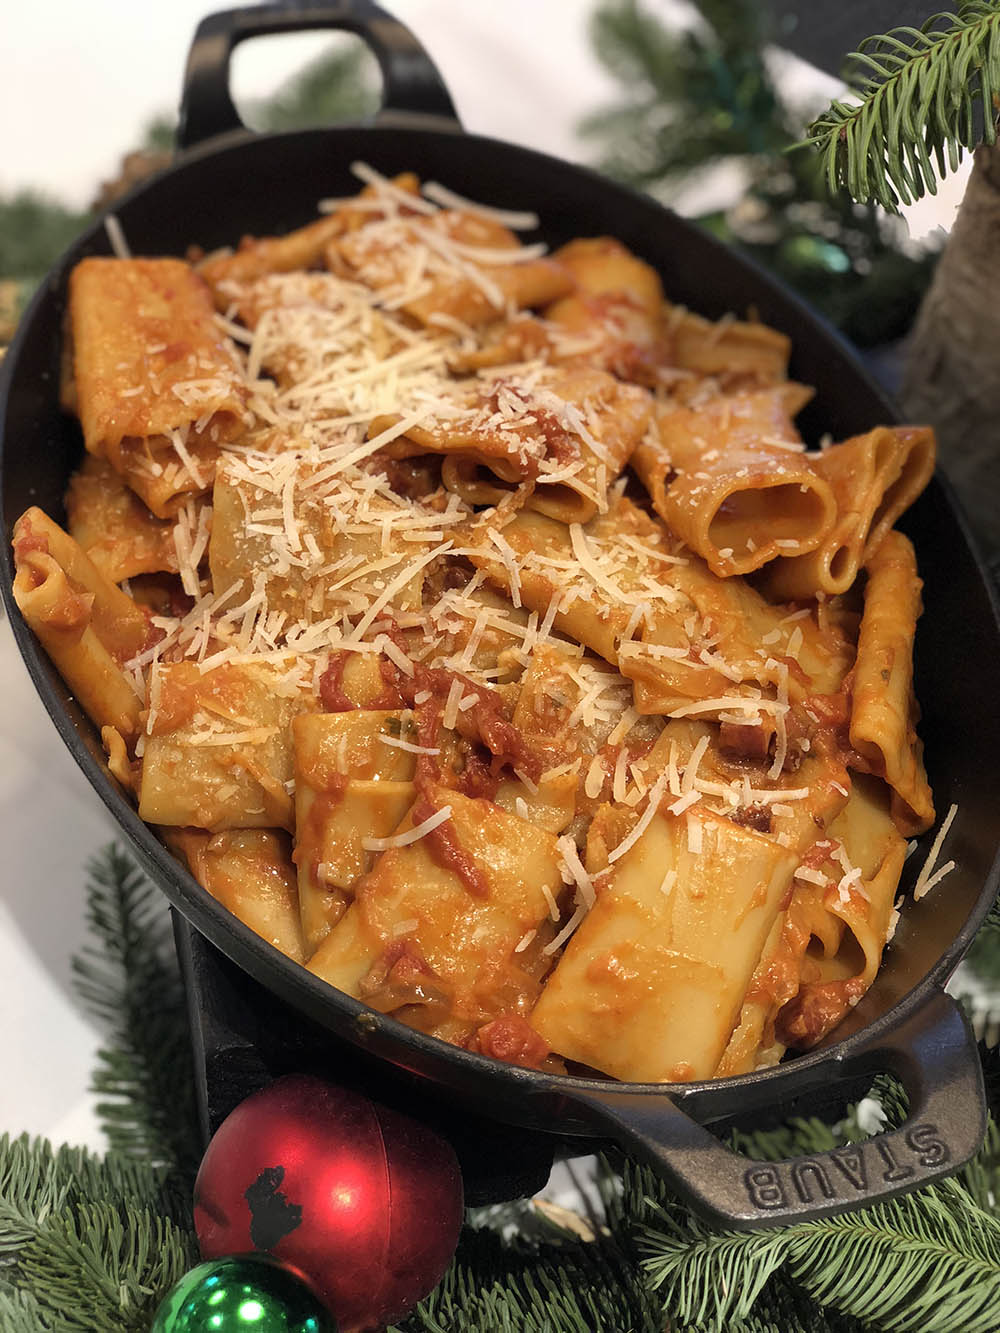 A paccheri pasta all'Amatricina is served.